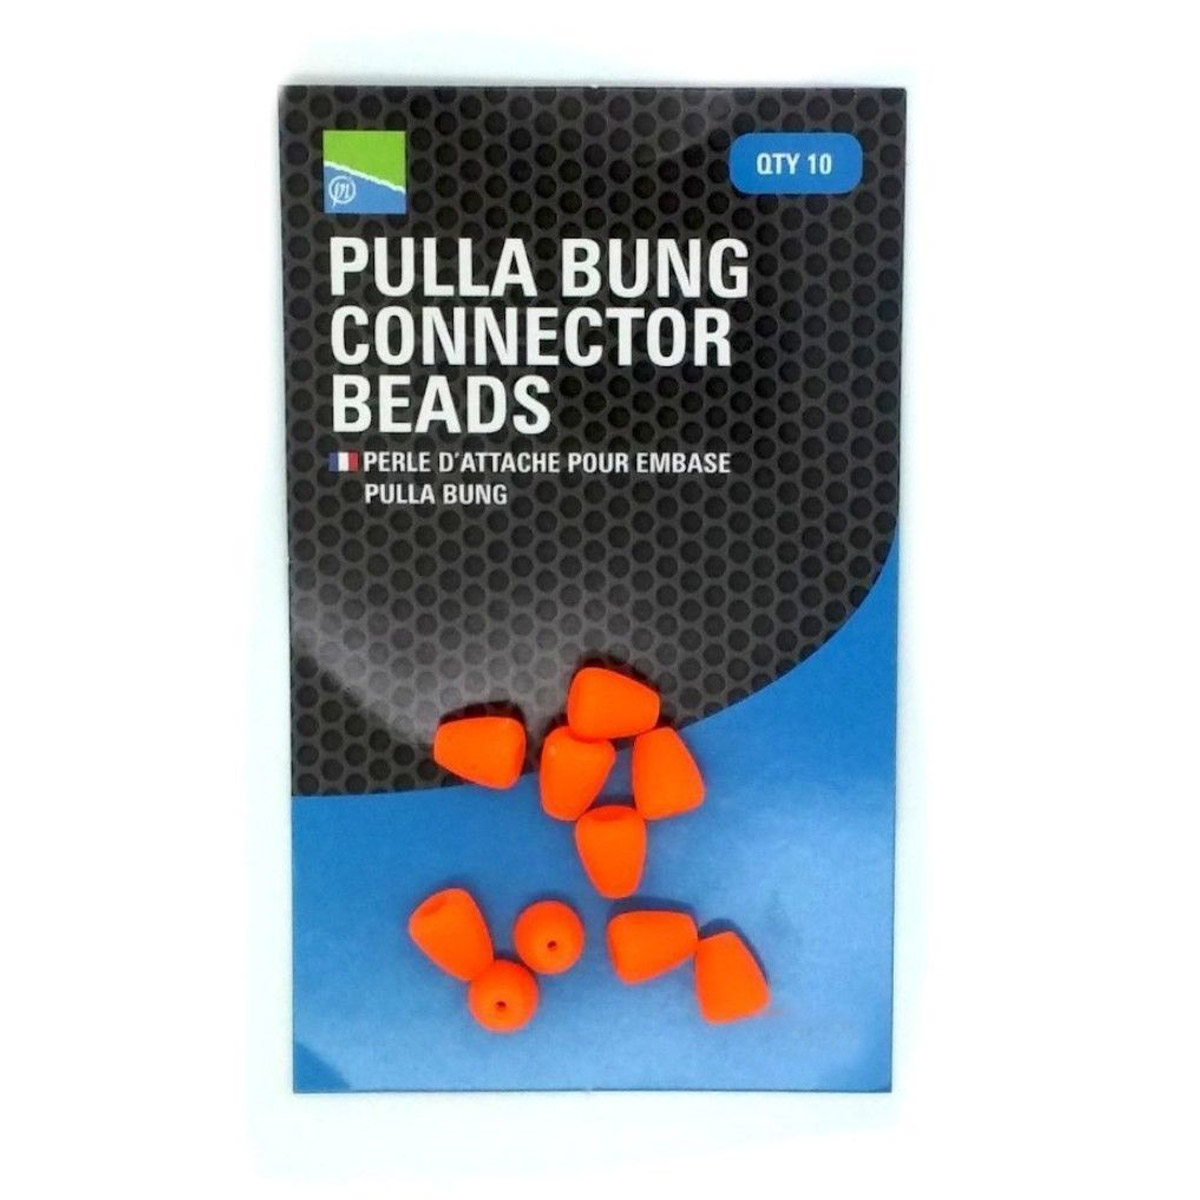 Preston Innovations Pulla Bung Connector Beads 